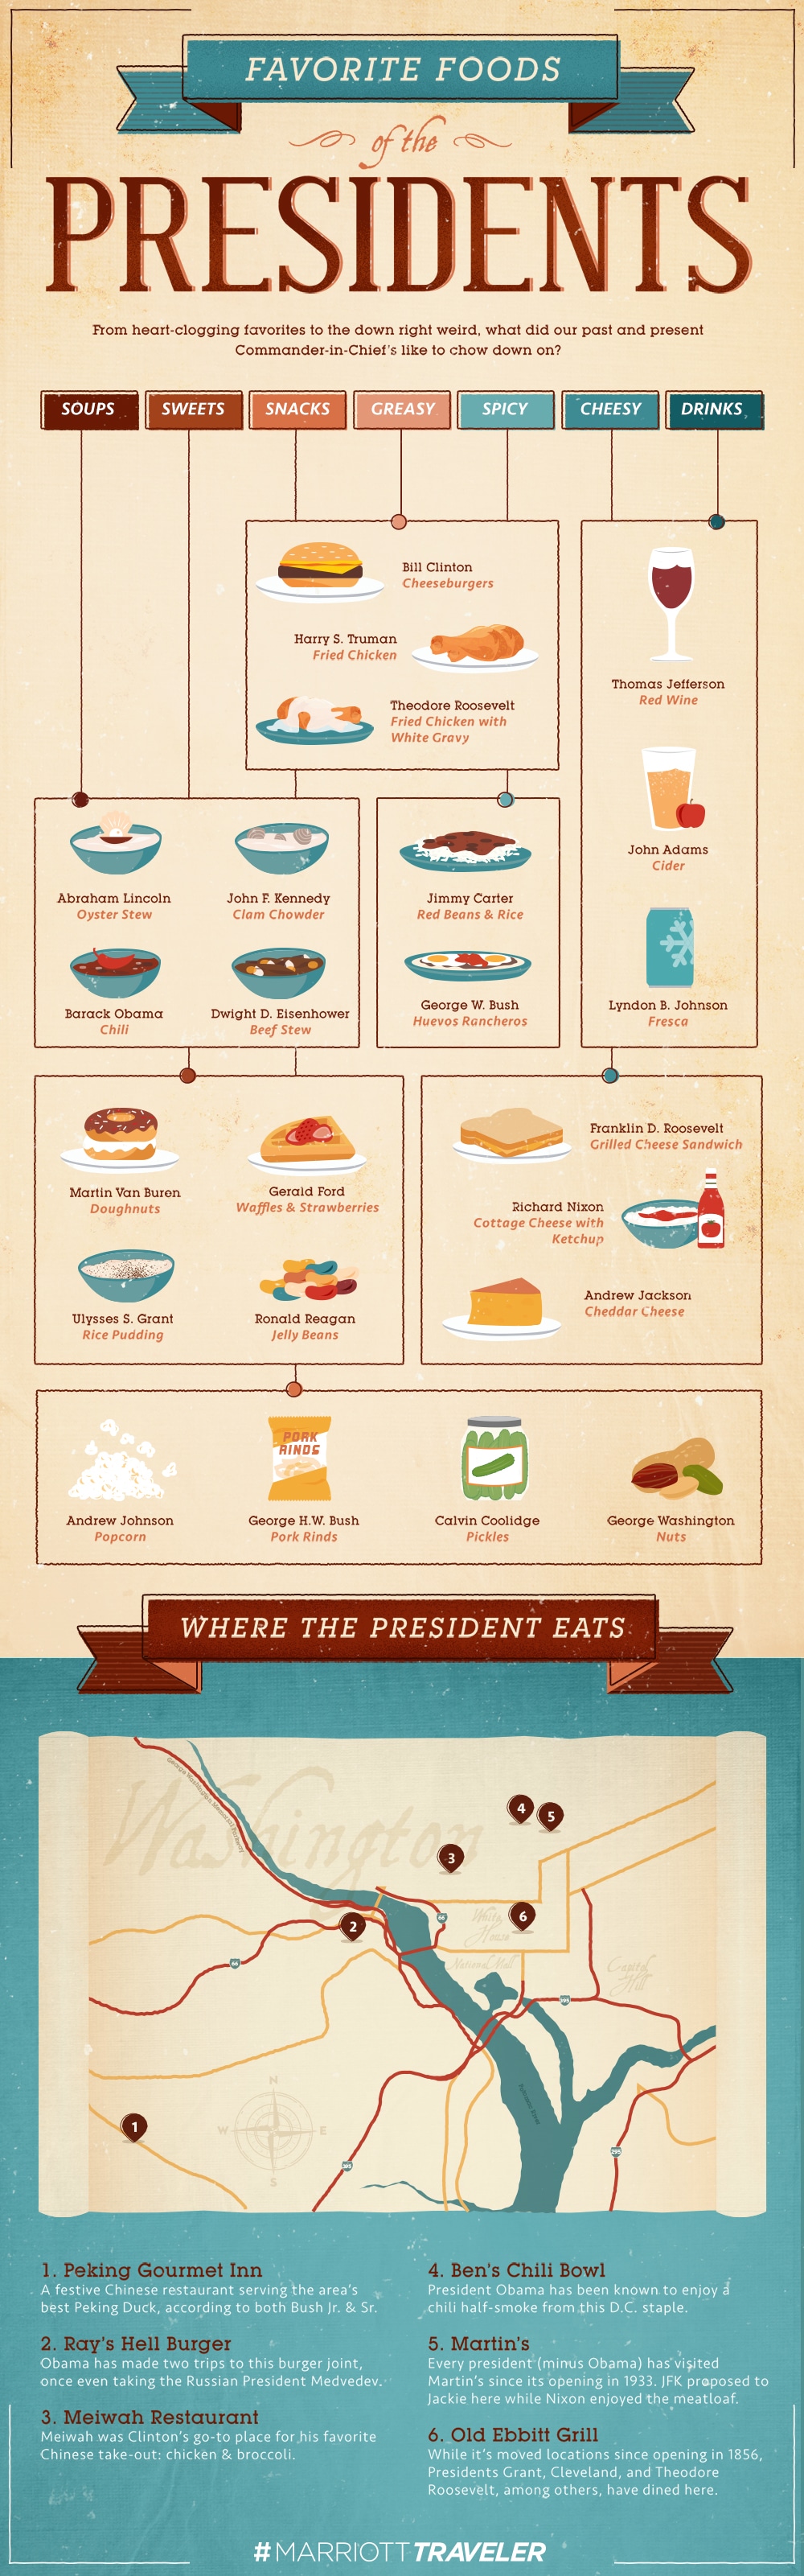 presidential places to eat in dc infographic